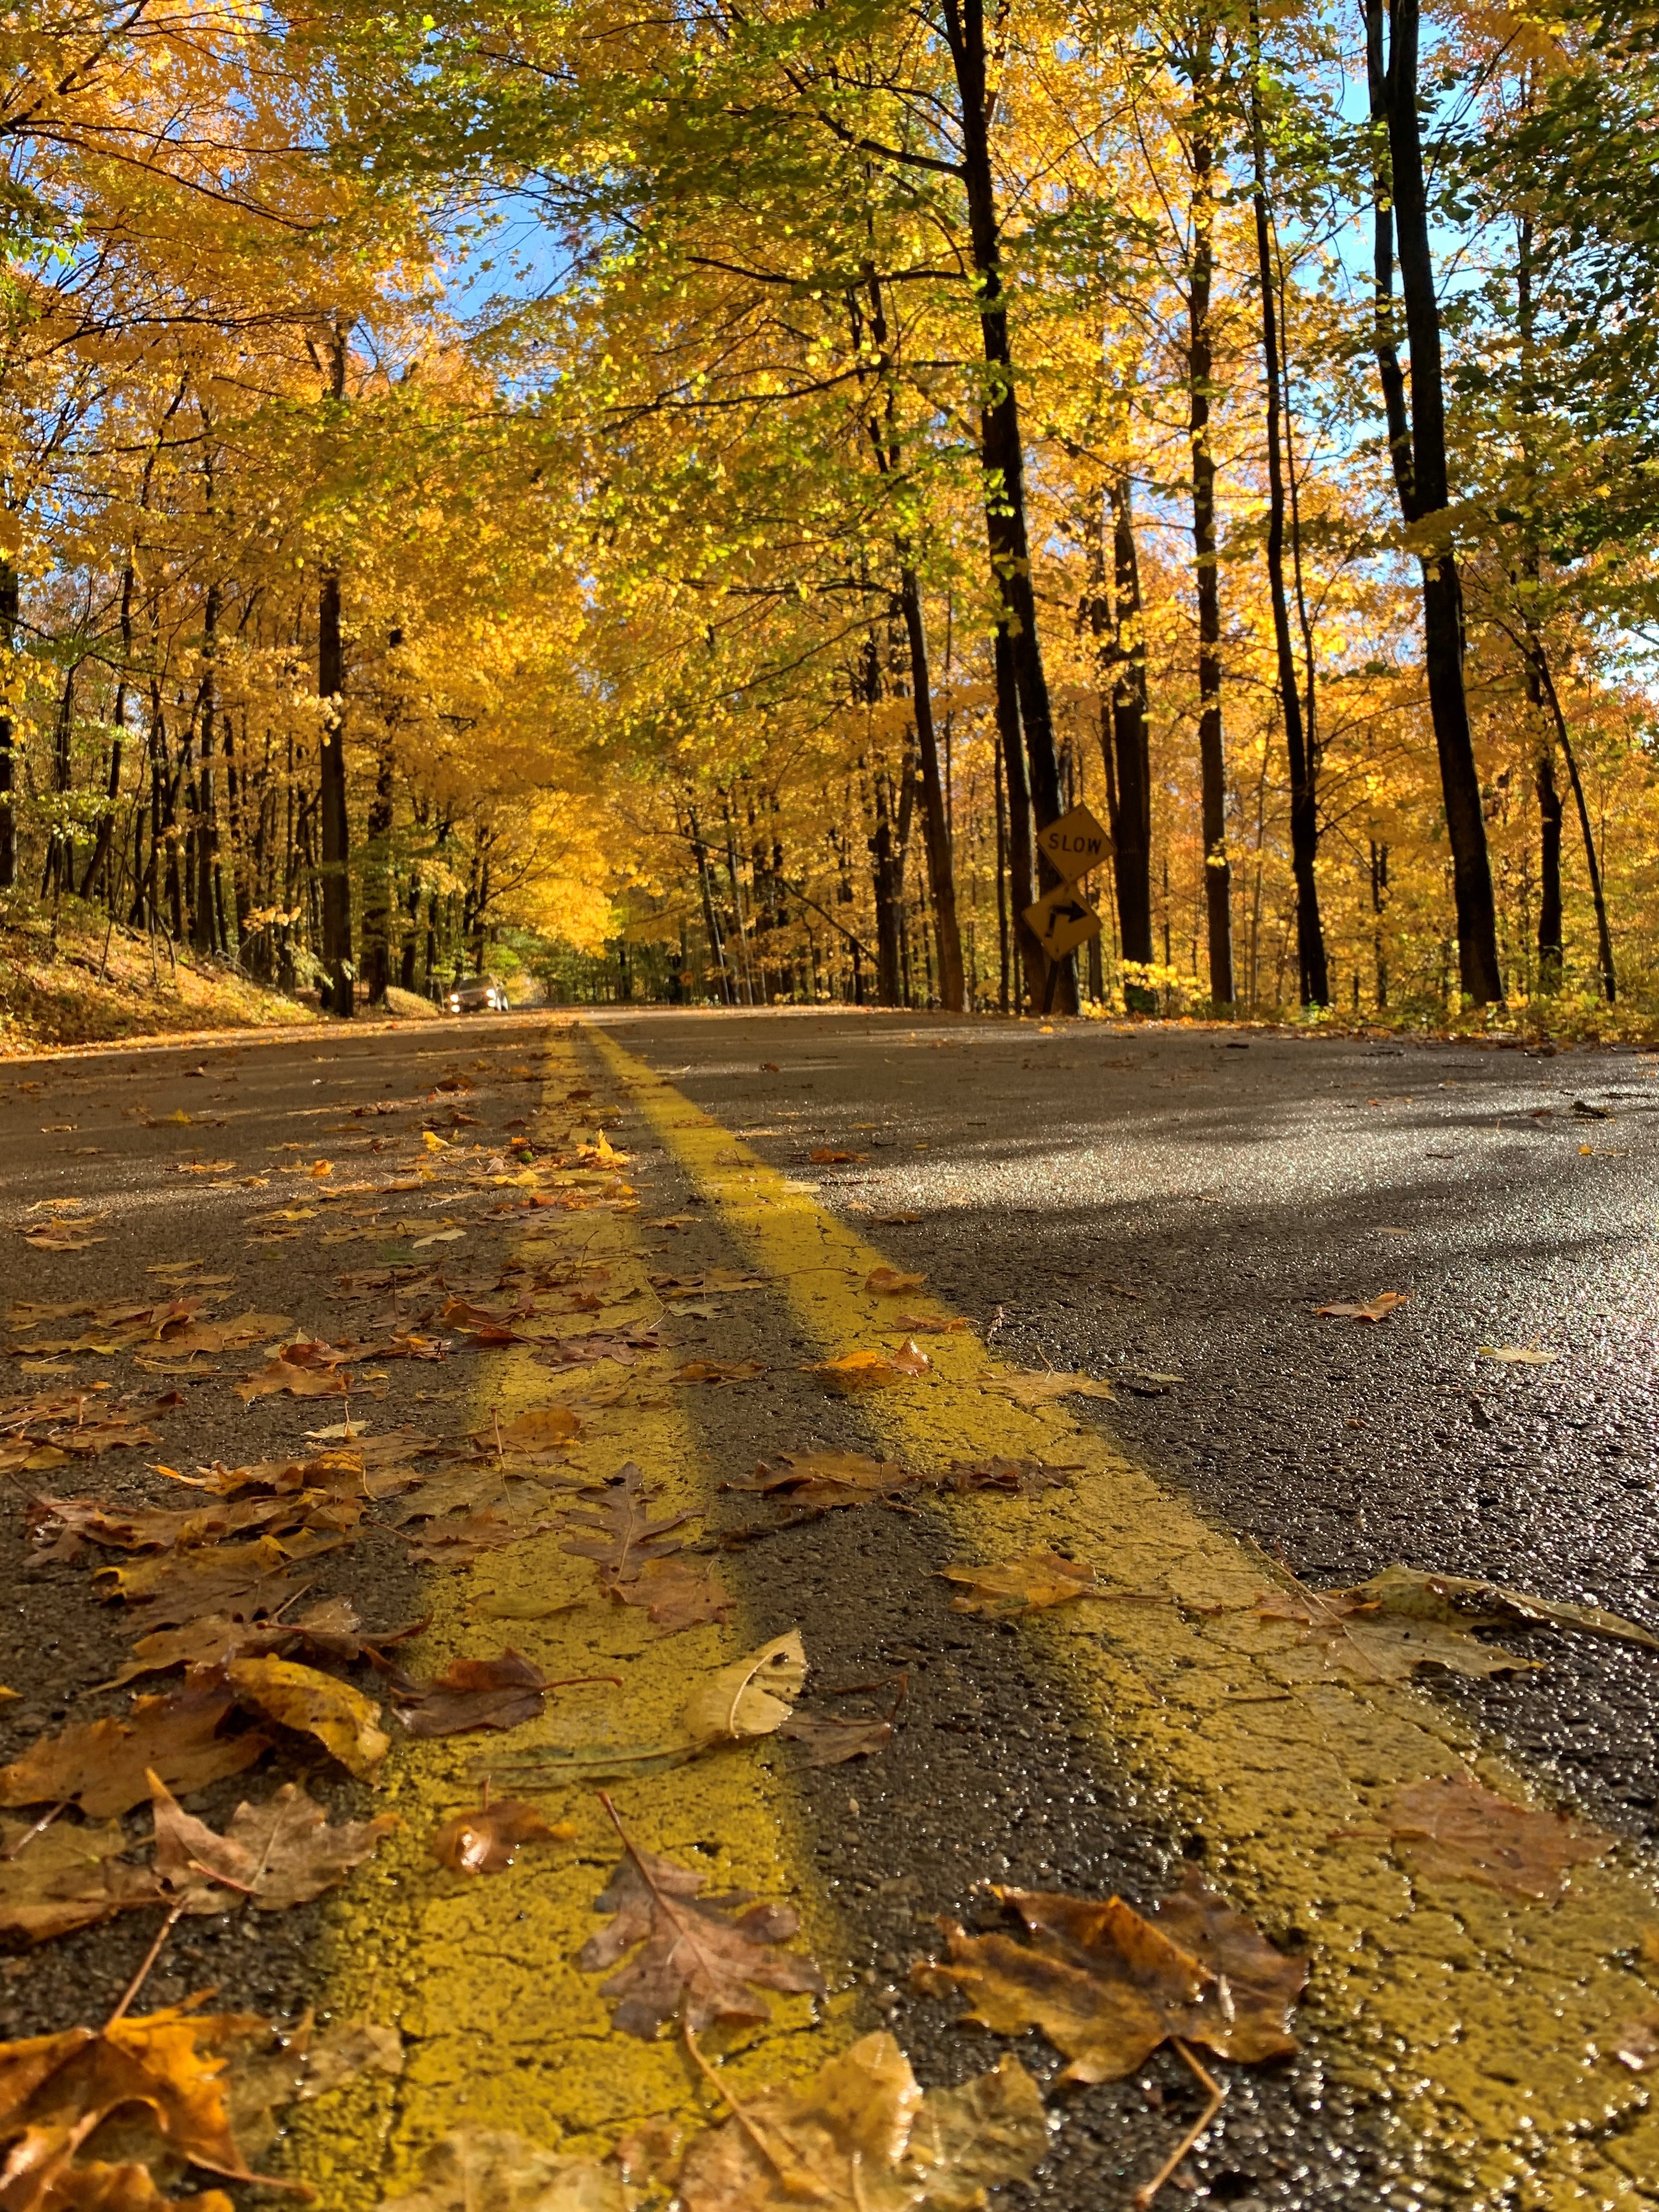 Driving road with tall trees and yellowish orange leaves on the ground